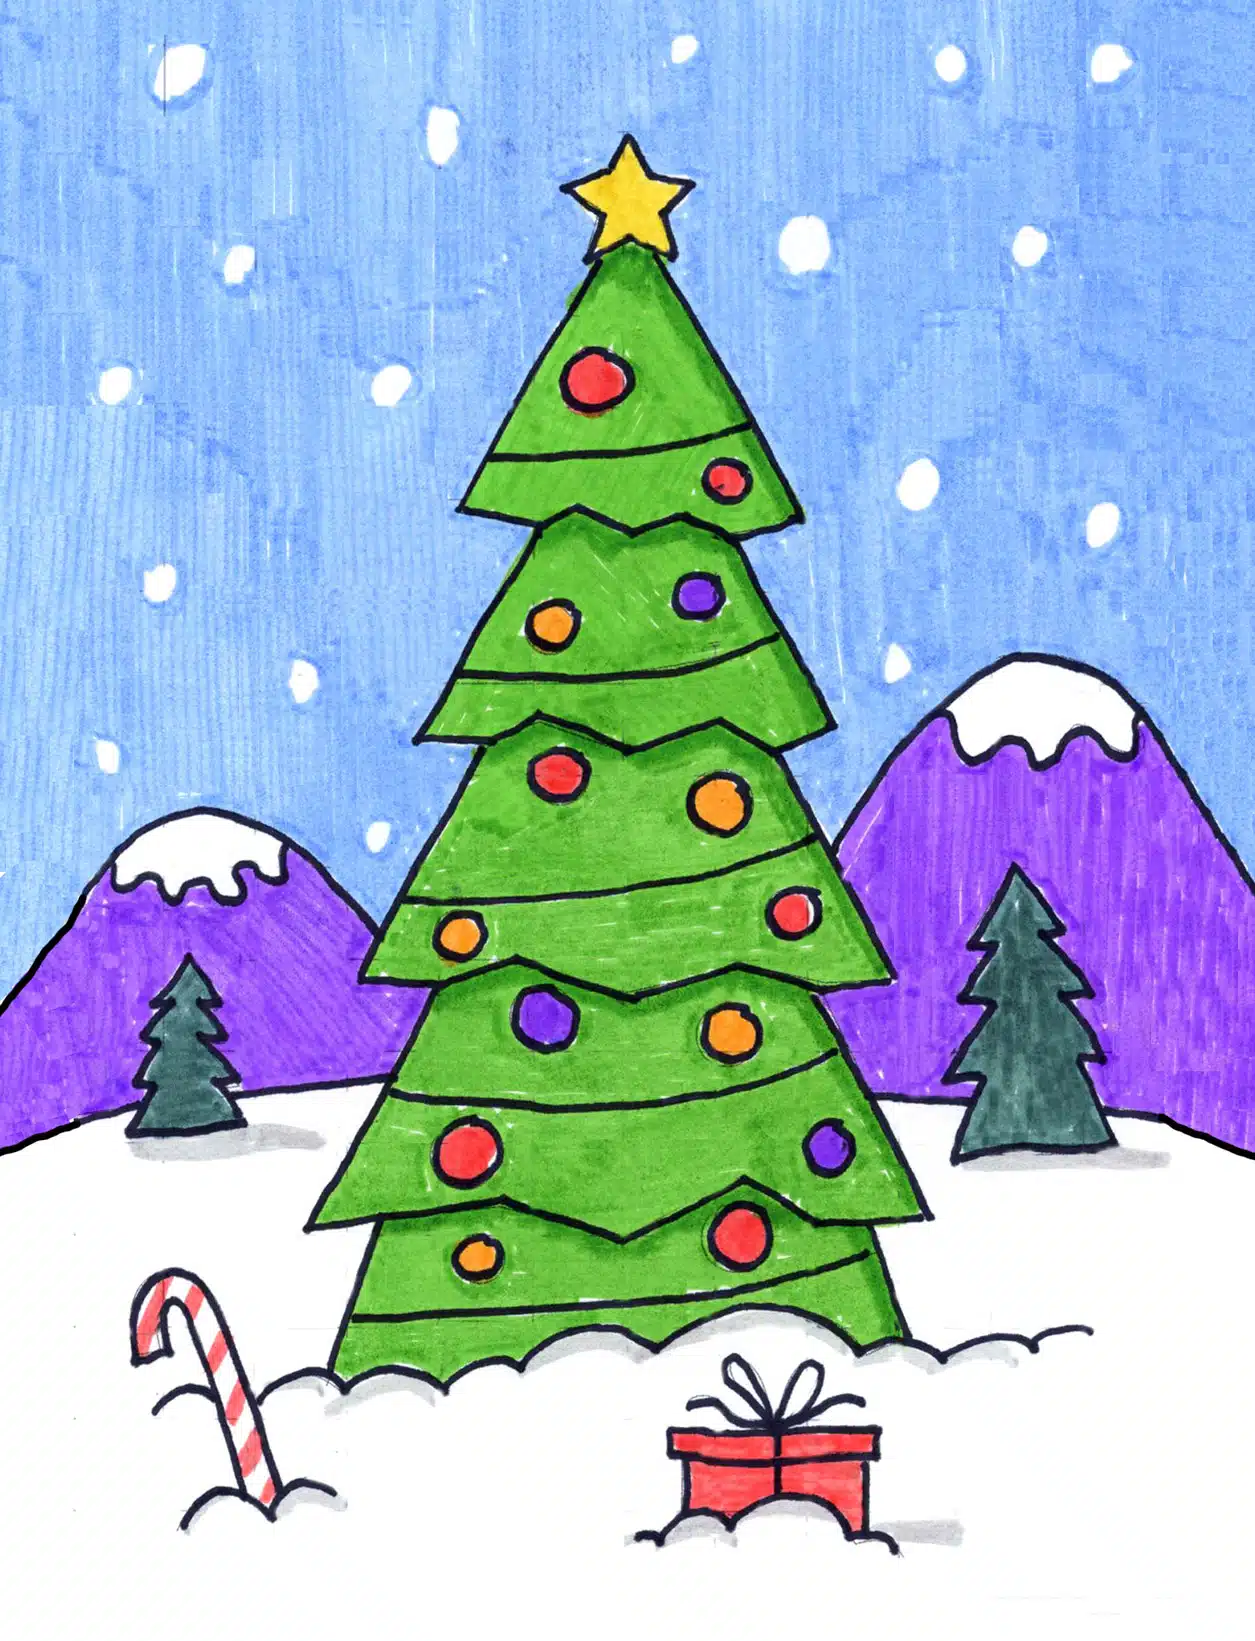 How to Draw a Christmas Tree with Lights (easy for kids)-saigonsouth.com.vn